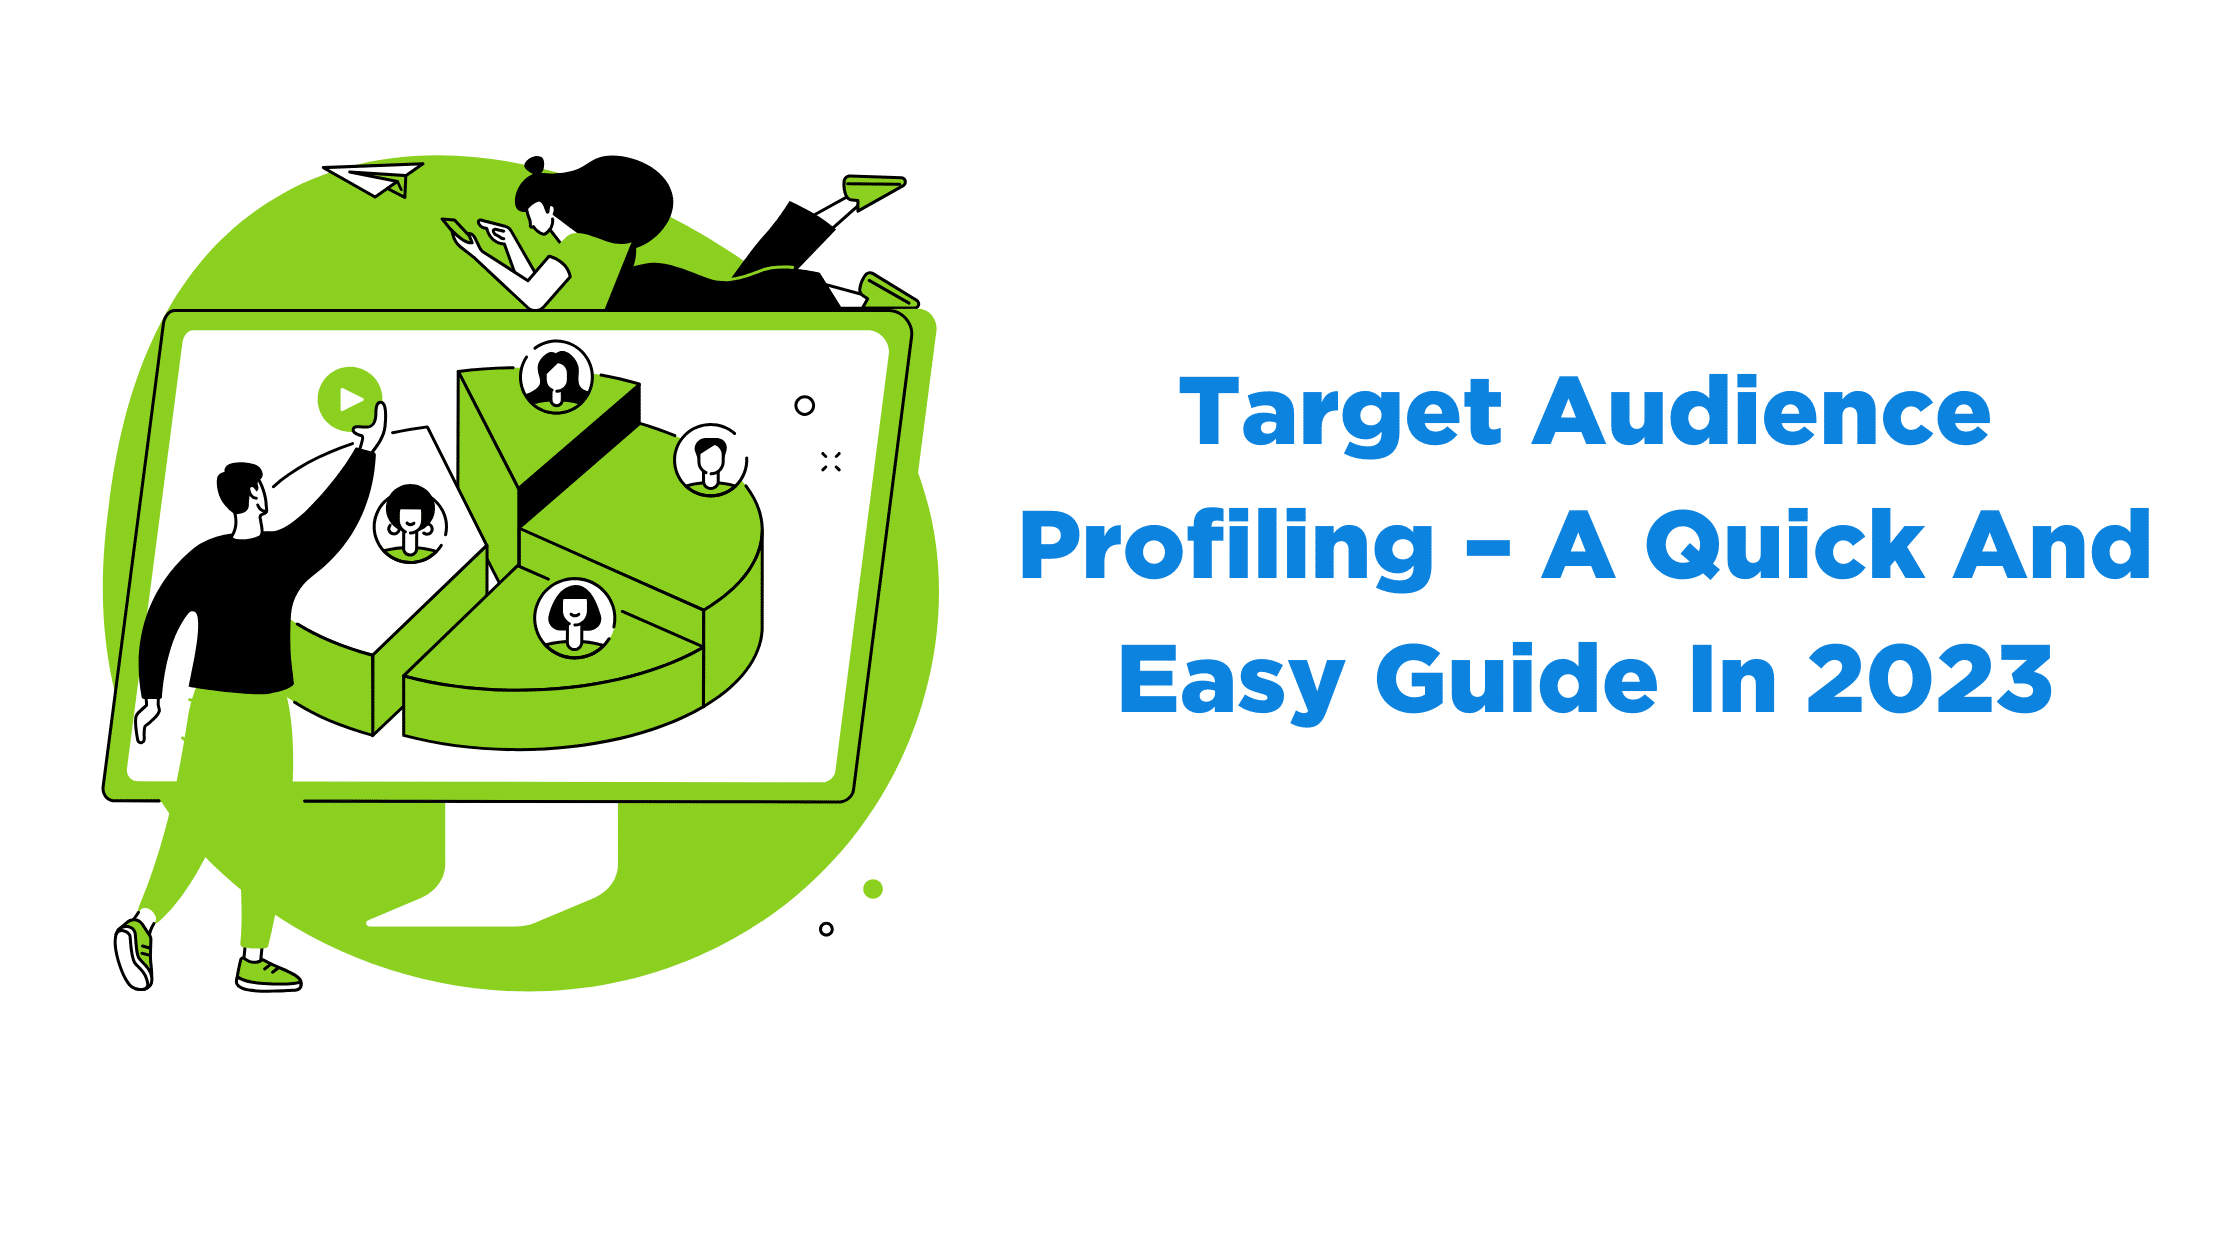 Target Audience Profiling – A Quick And Easy Guide In 2023